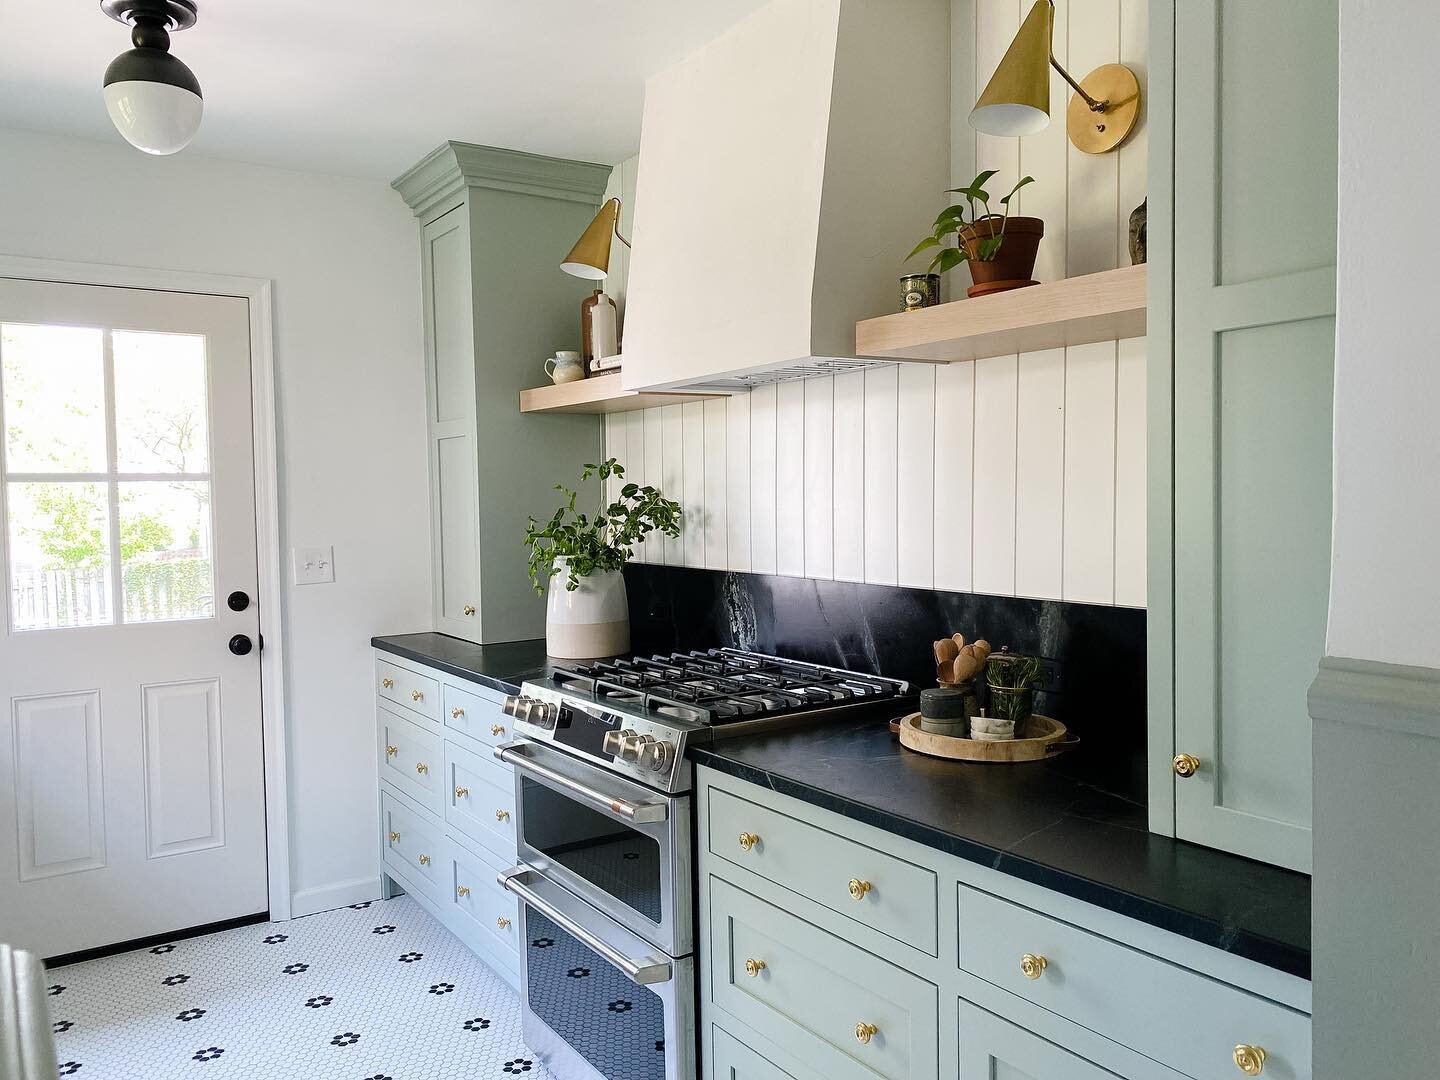 Finally got photos of this kitchen remodel that we finished a few months ago. Such a dreamboat of a client - trusting, up for soapstone, and wanting to keep the character in their 1939 home.
&mdash;
#interiordesign #interiordesigner #home #oldhouselo